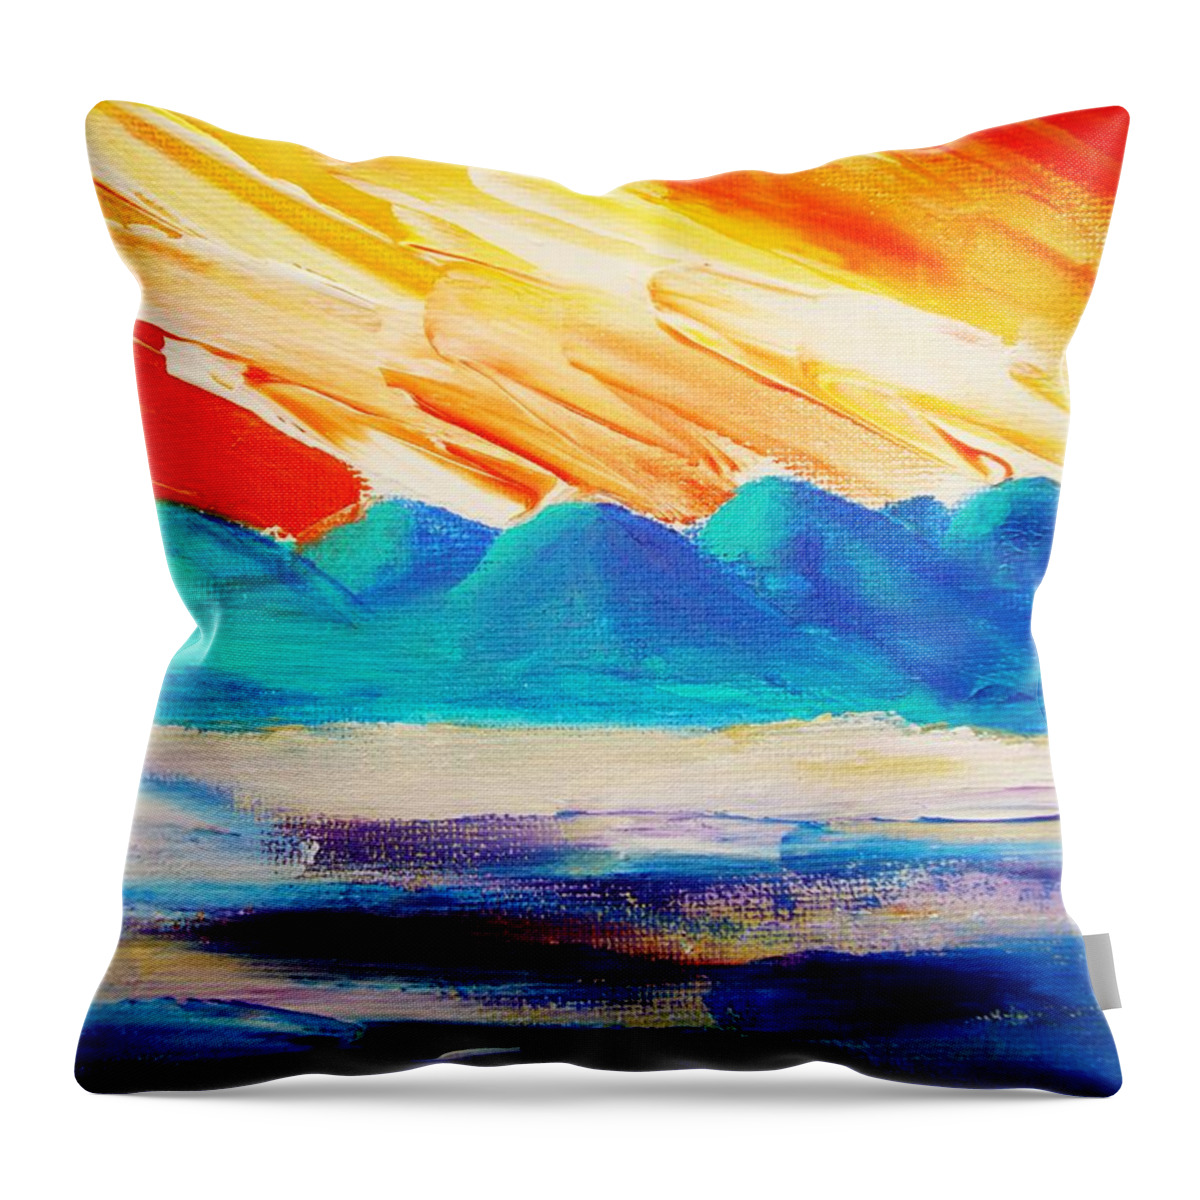 Bright Throw Pillow featuring the painting Bold Day by Melinda Etzold